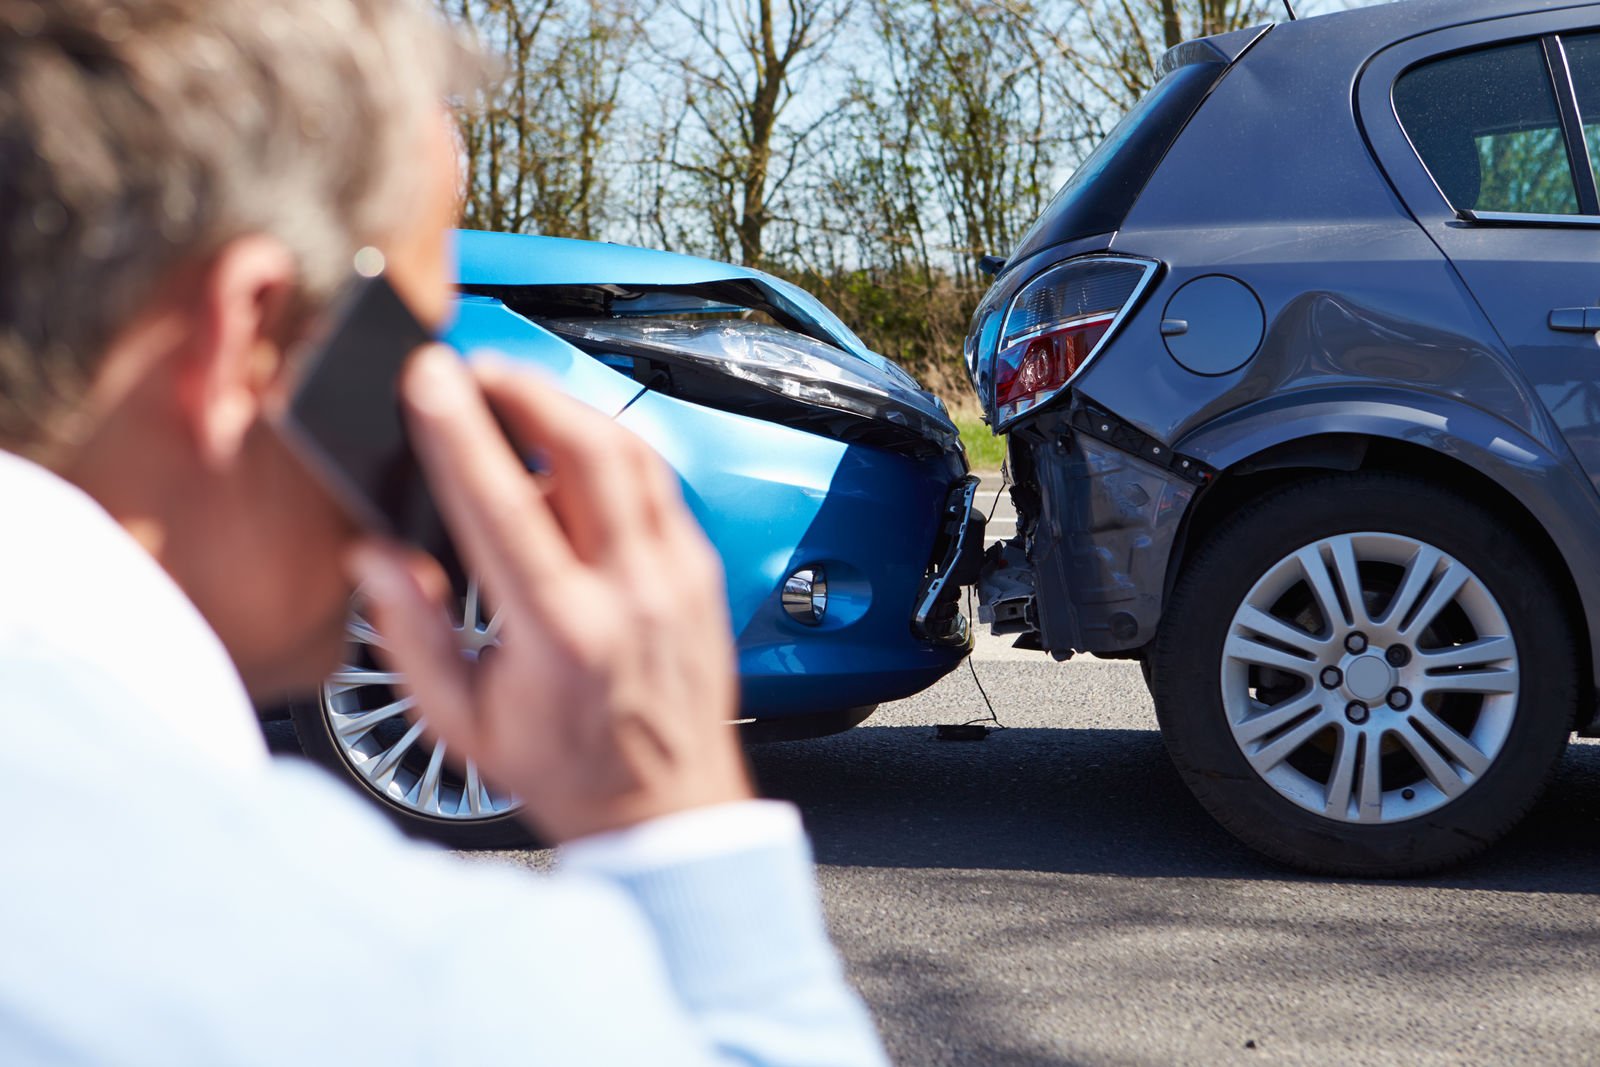 If I am in a car accident, do I call their insurance or mine?